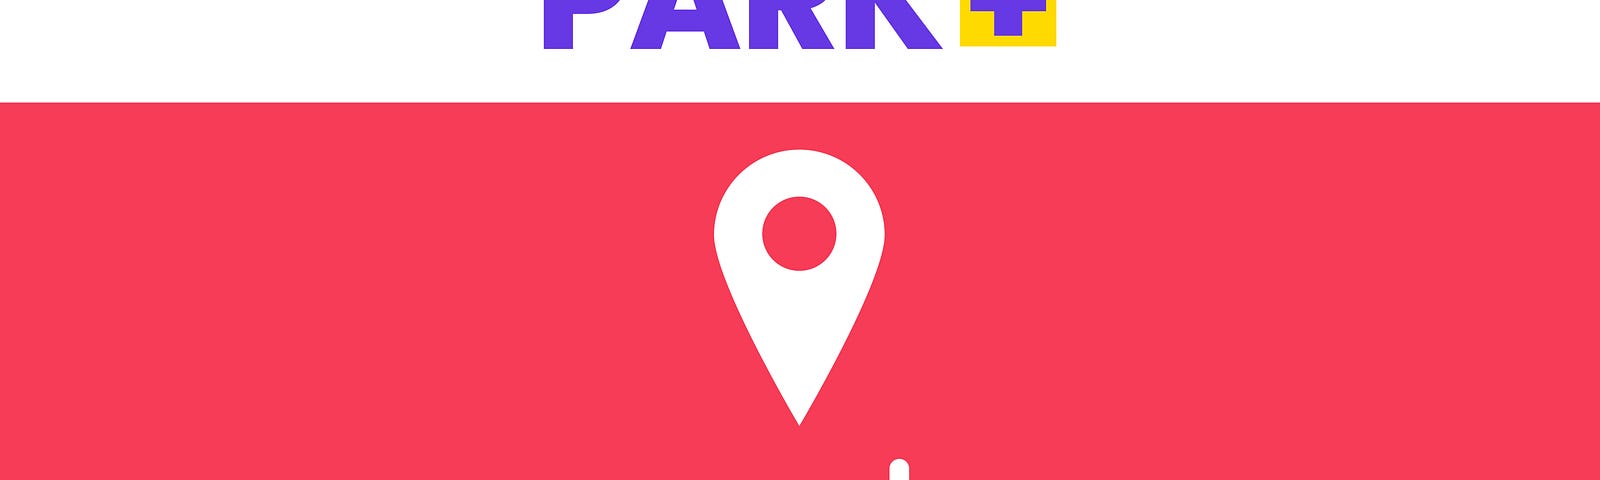 Park+ solves parking issues.